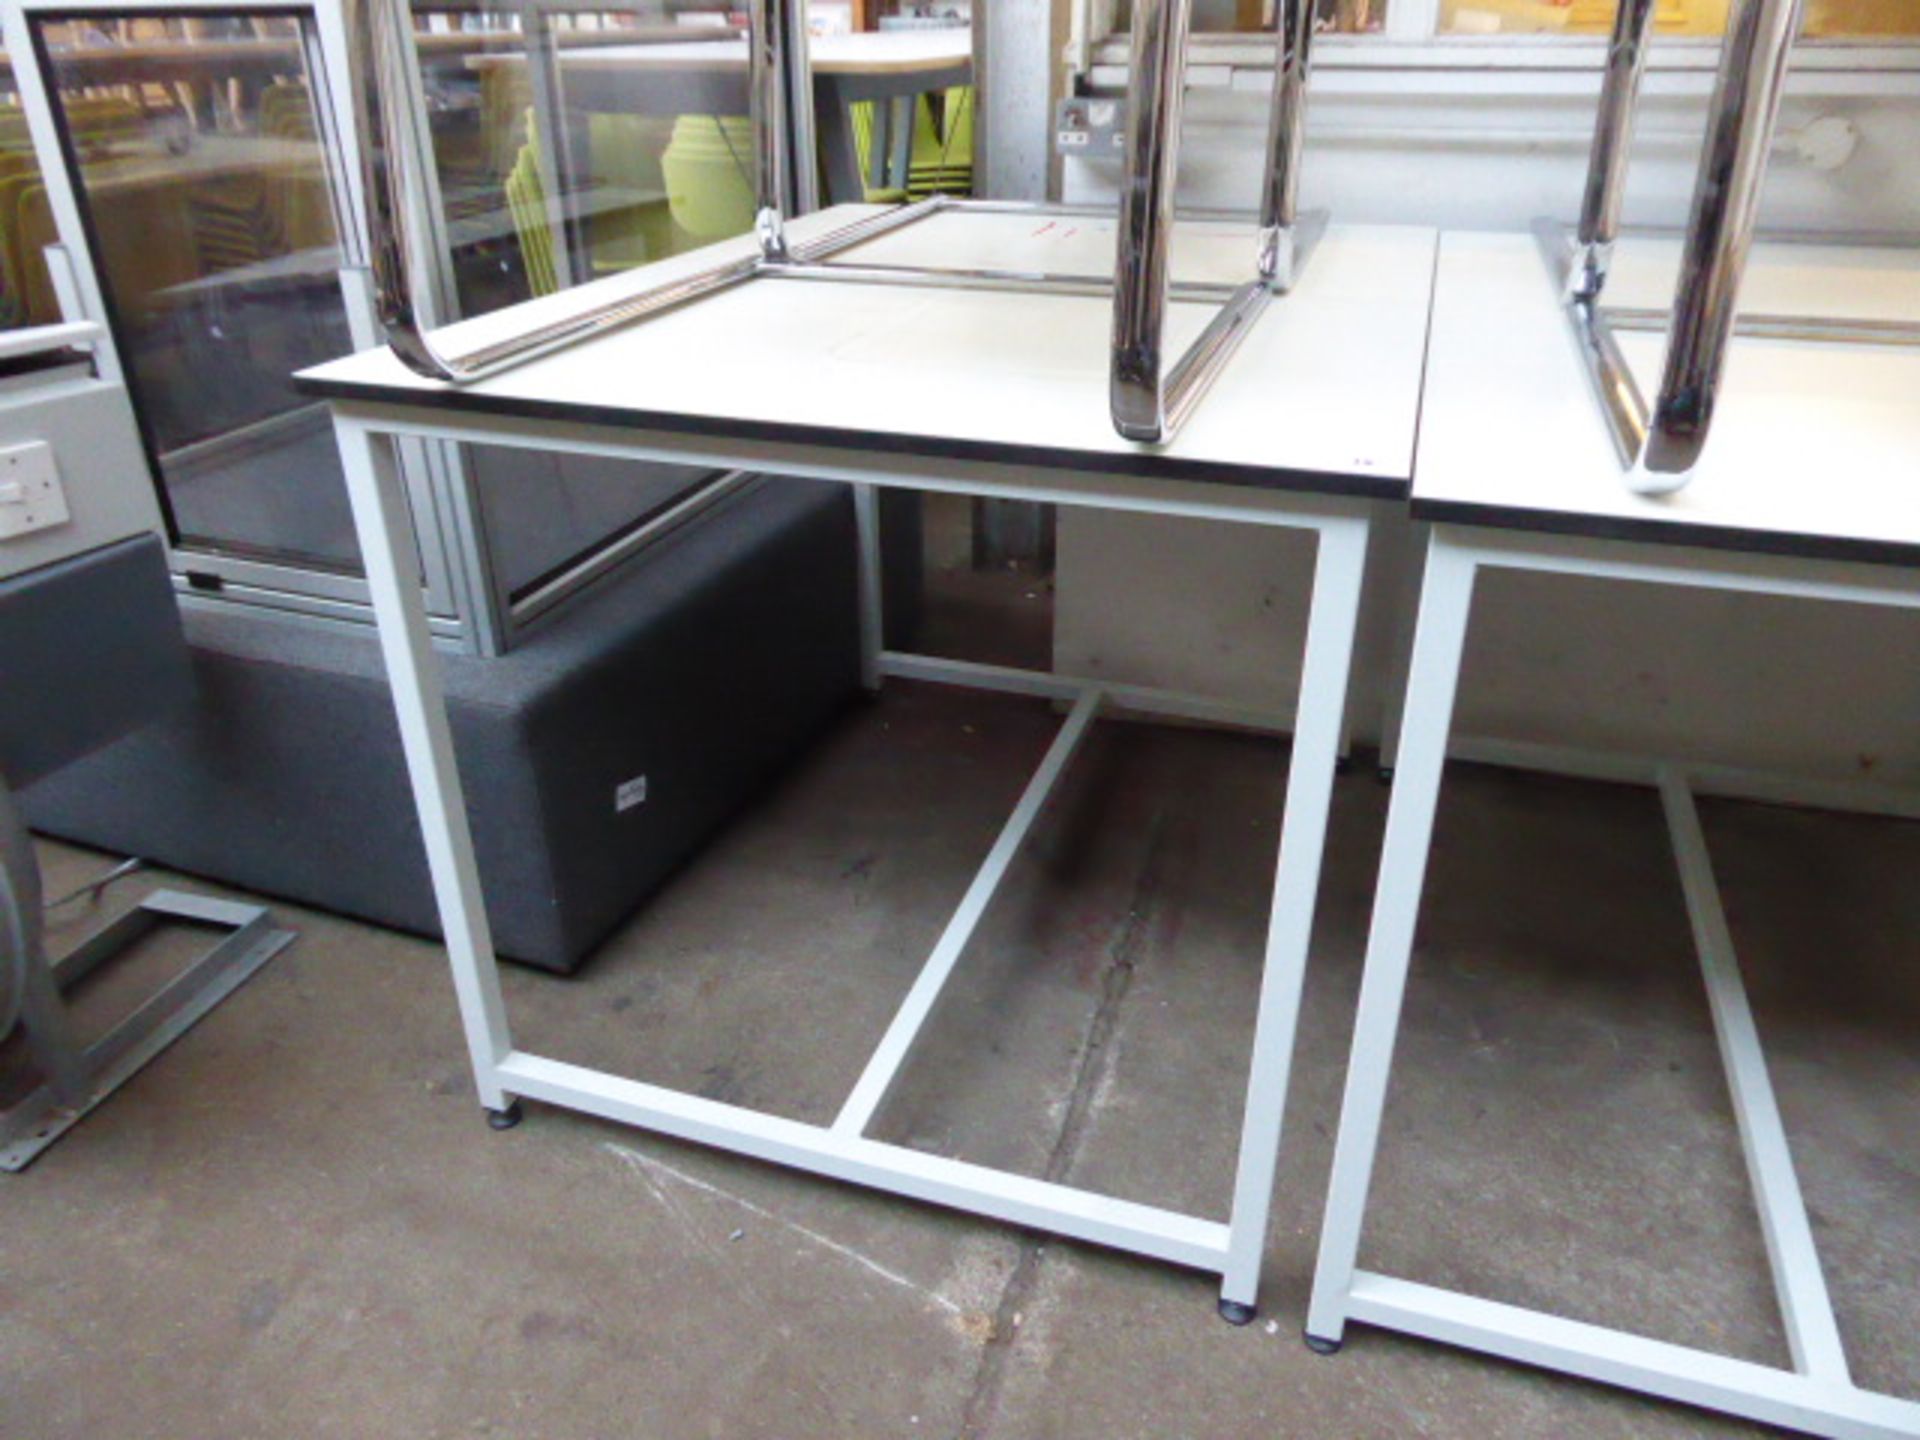 120cm x 90cm white top metal frame table - Image 2 of 3